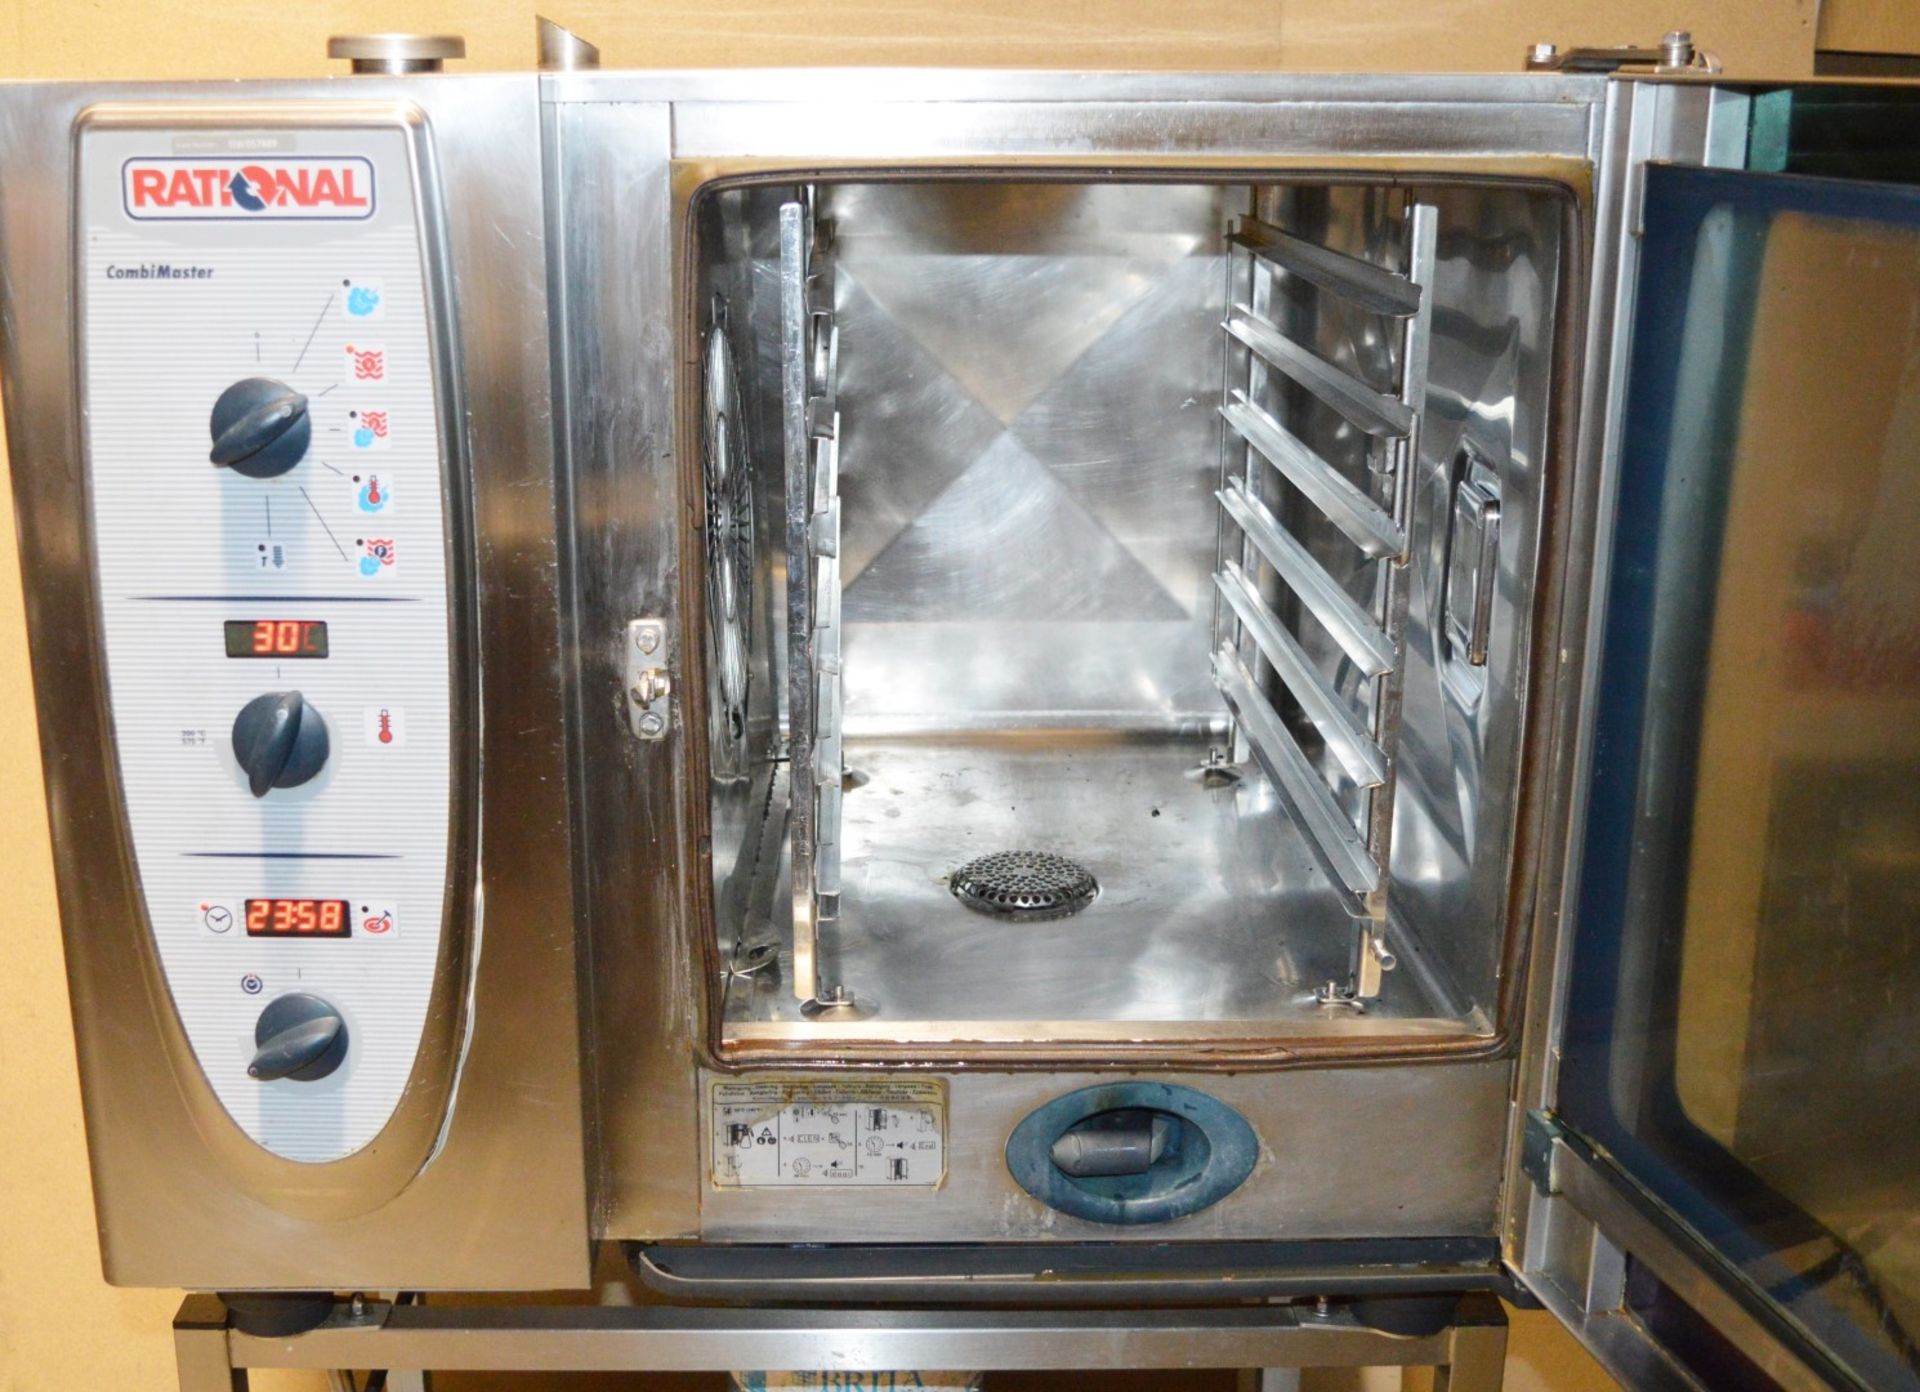 1 x Rational CombiMaster 6 Grid Combi Oven With Stand - CL232 - 3 Phase - H146x W85 x D82 cms - - Image 9 of 11